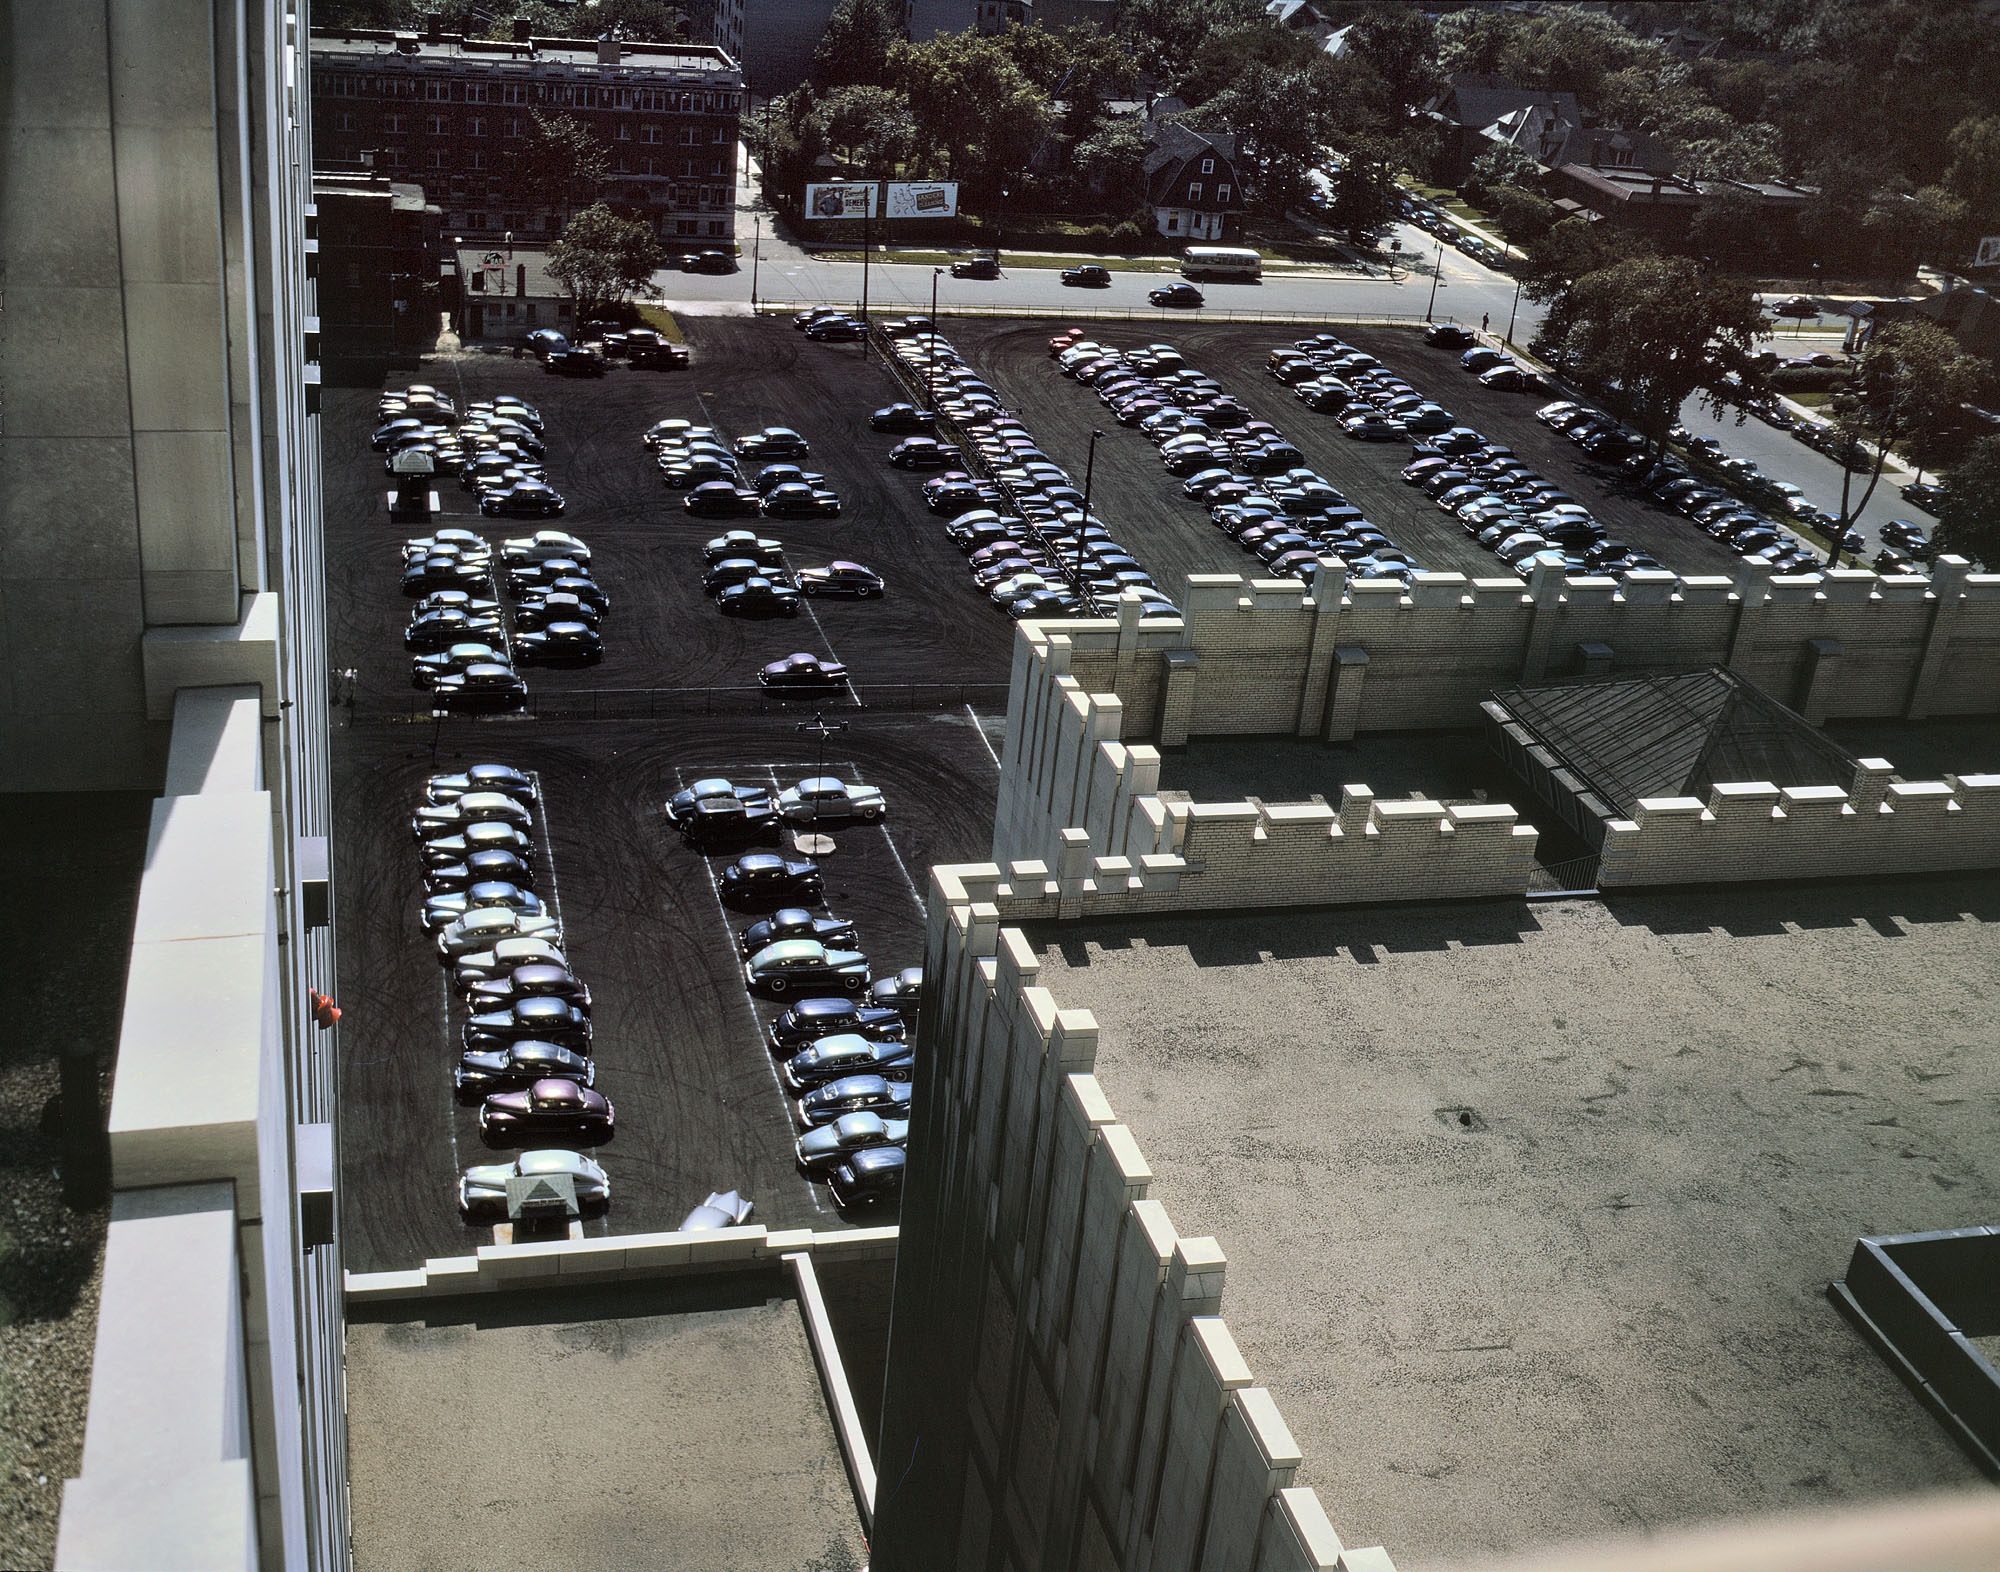 Detroit, July 1942. "Looking down on a parking lot from the rear of the Fisher Building." 4x5 Kodachrome transparency by Arthur Siegel. View full size.